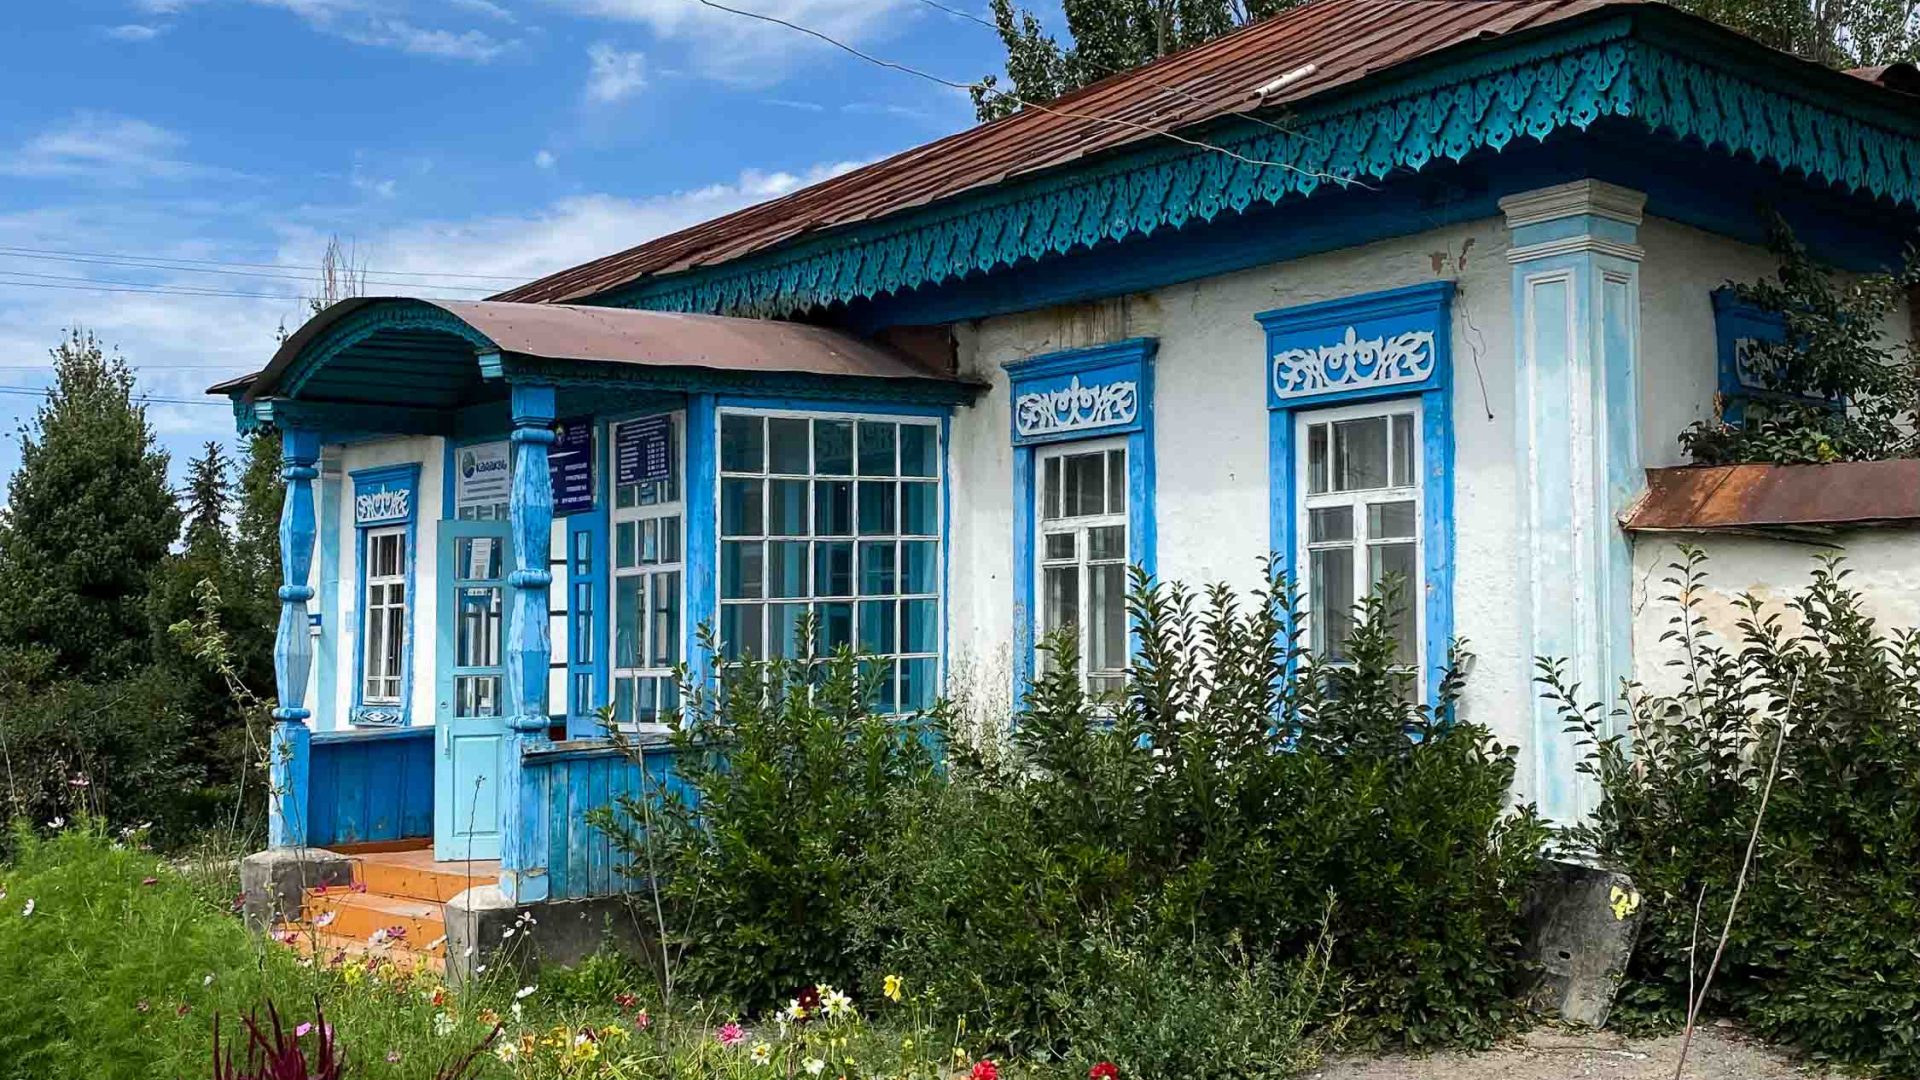 A home in the Russian quarter which has painted blue shutters.